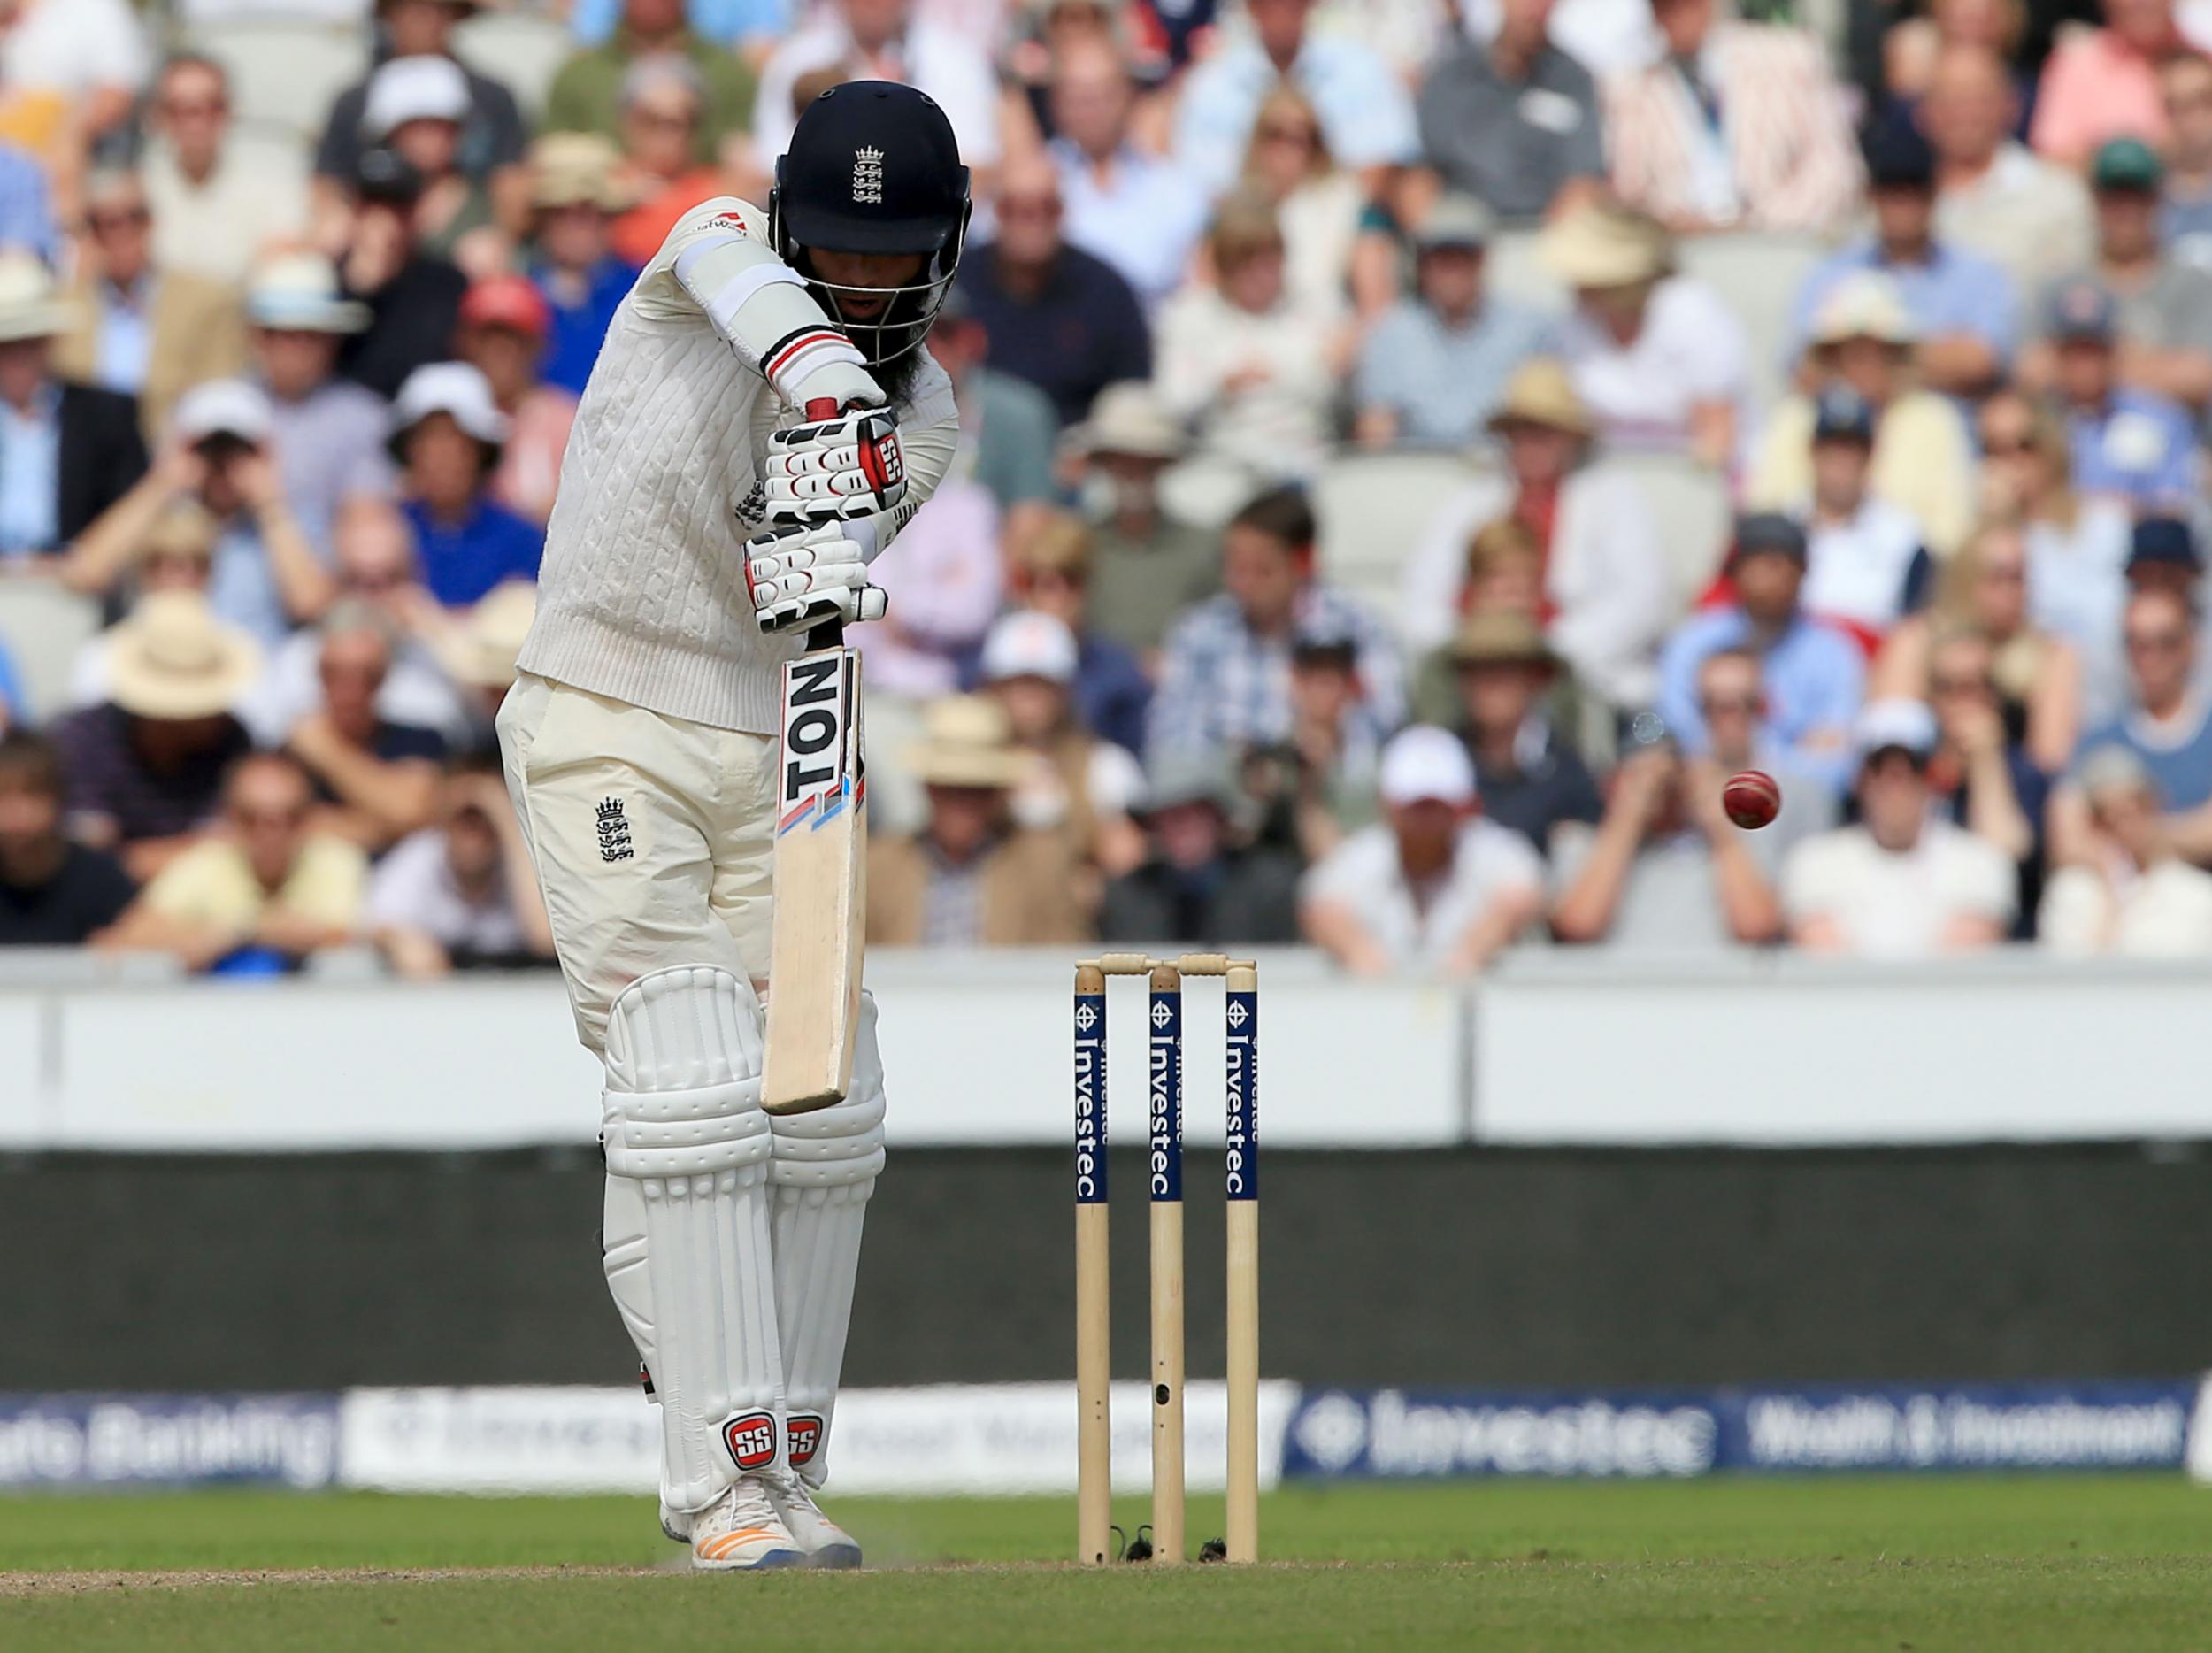 England wobbled when Moeen edged to second slip